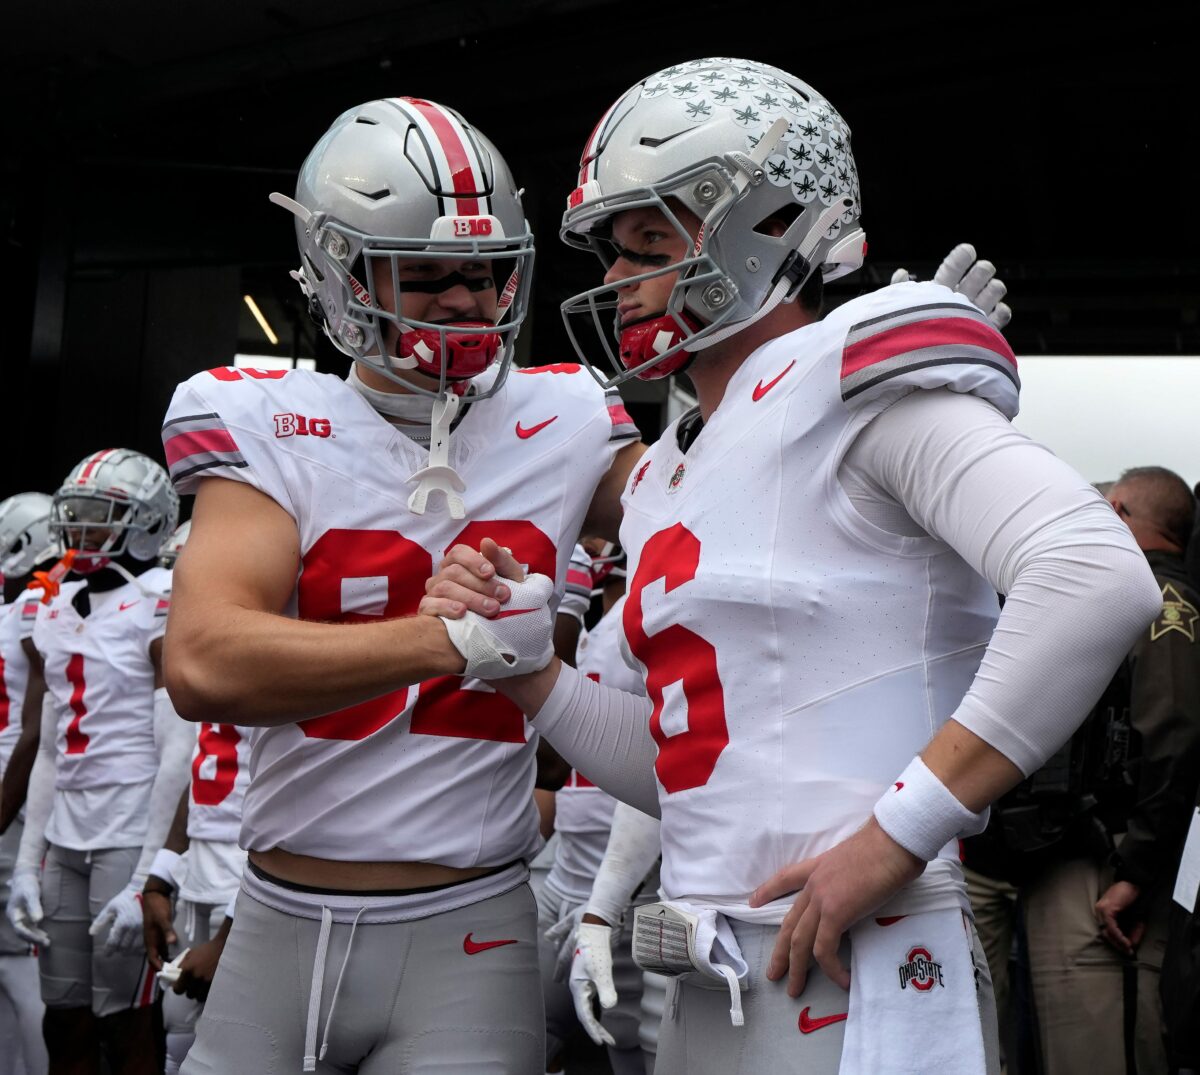 The day after: Lasting thoughts on Ohio State football’s win over Purdue